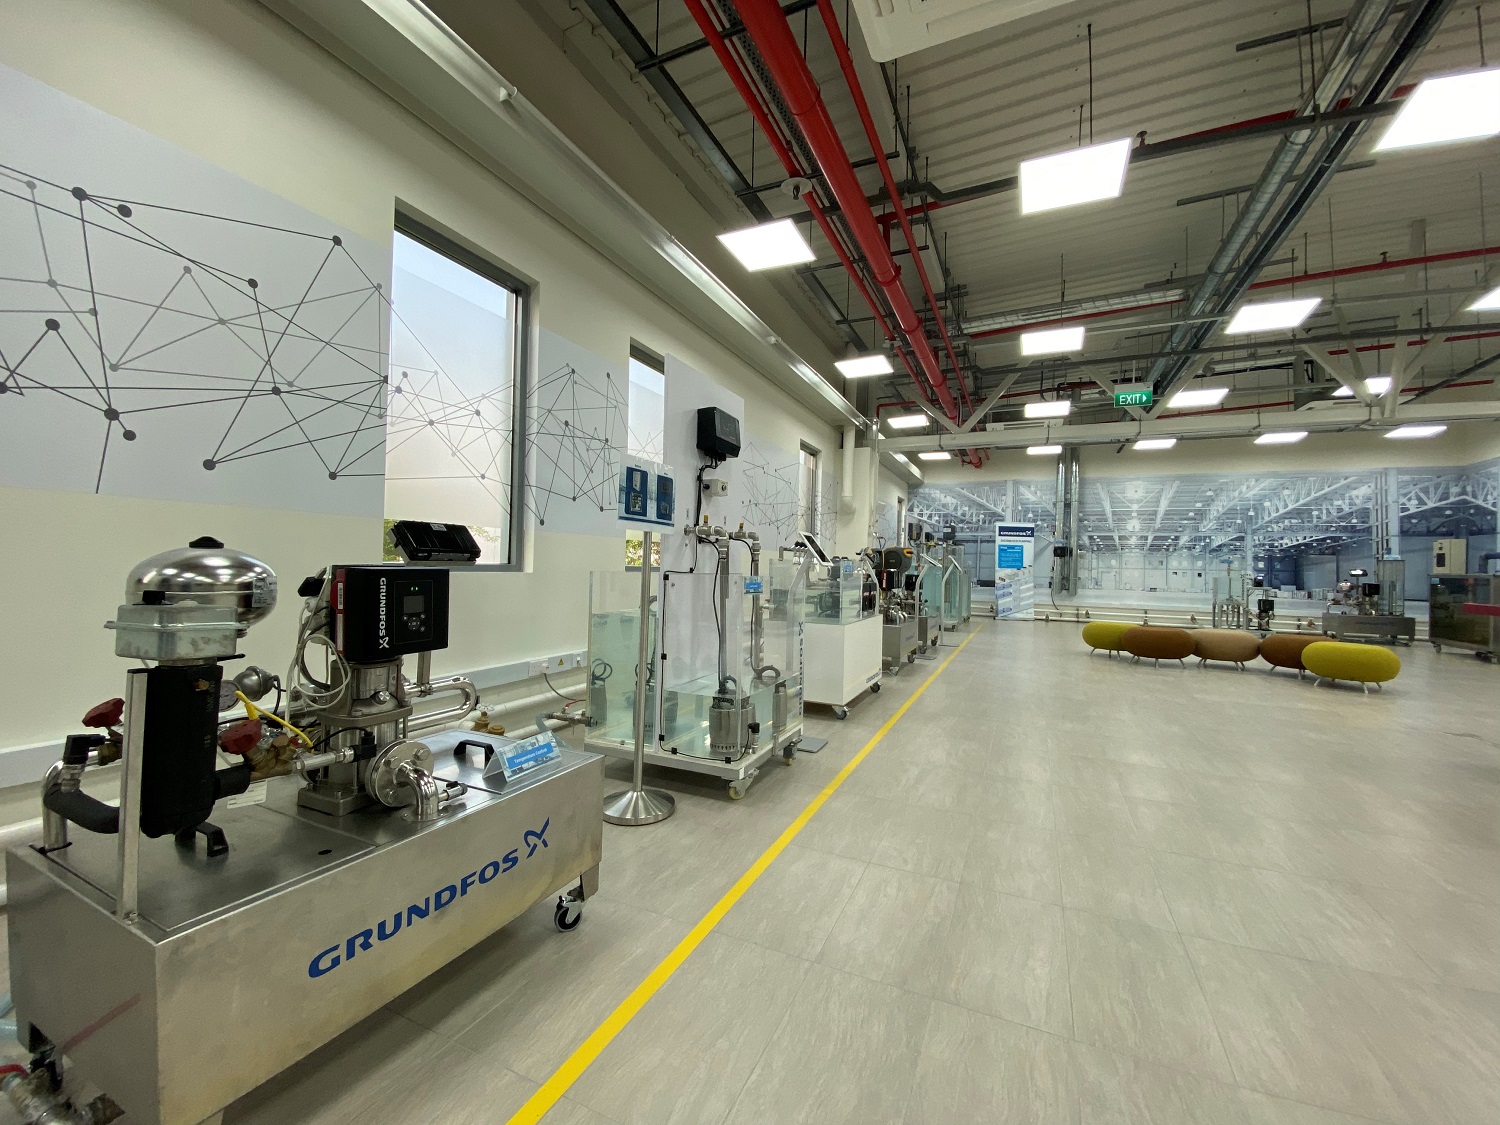 Grundfos' new iSOLUTIONS lab is the first of its kind by the company in Asia-Pacific.